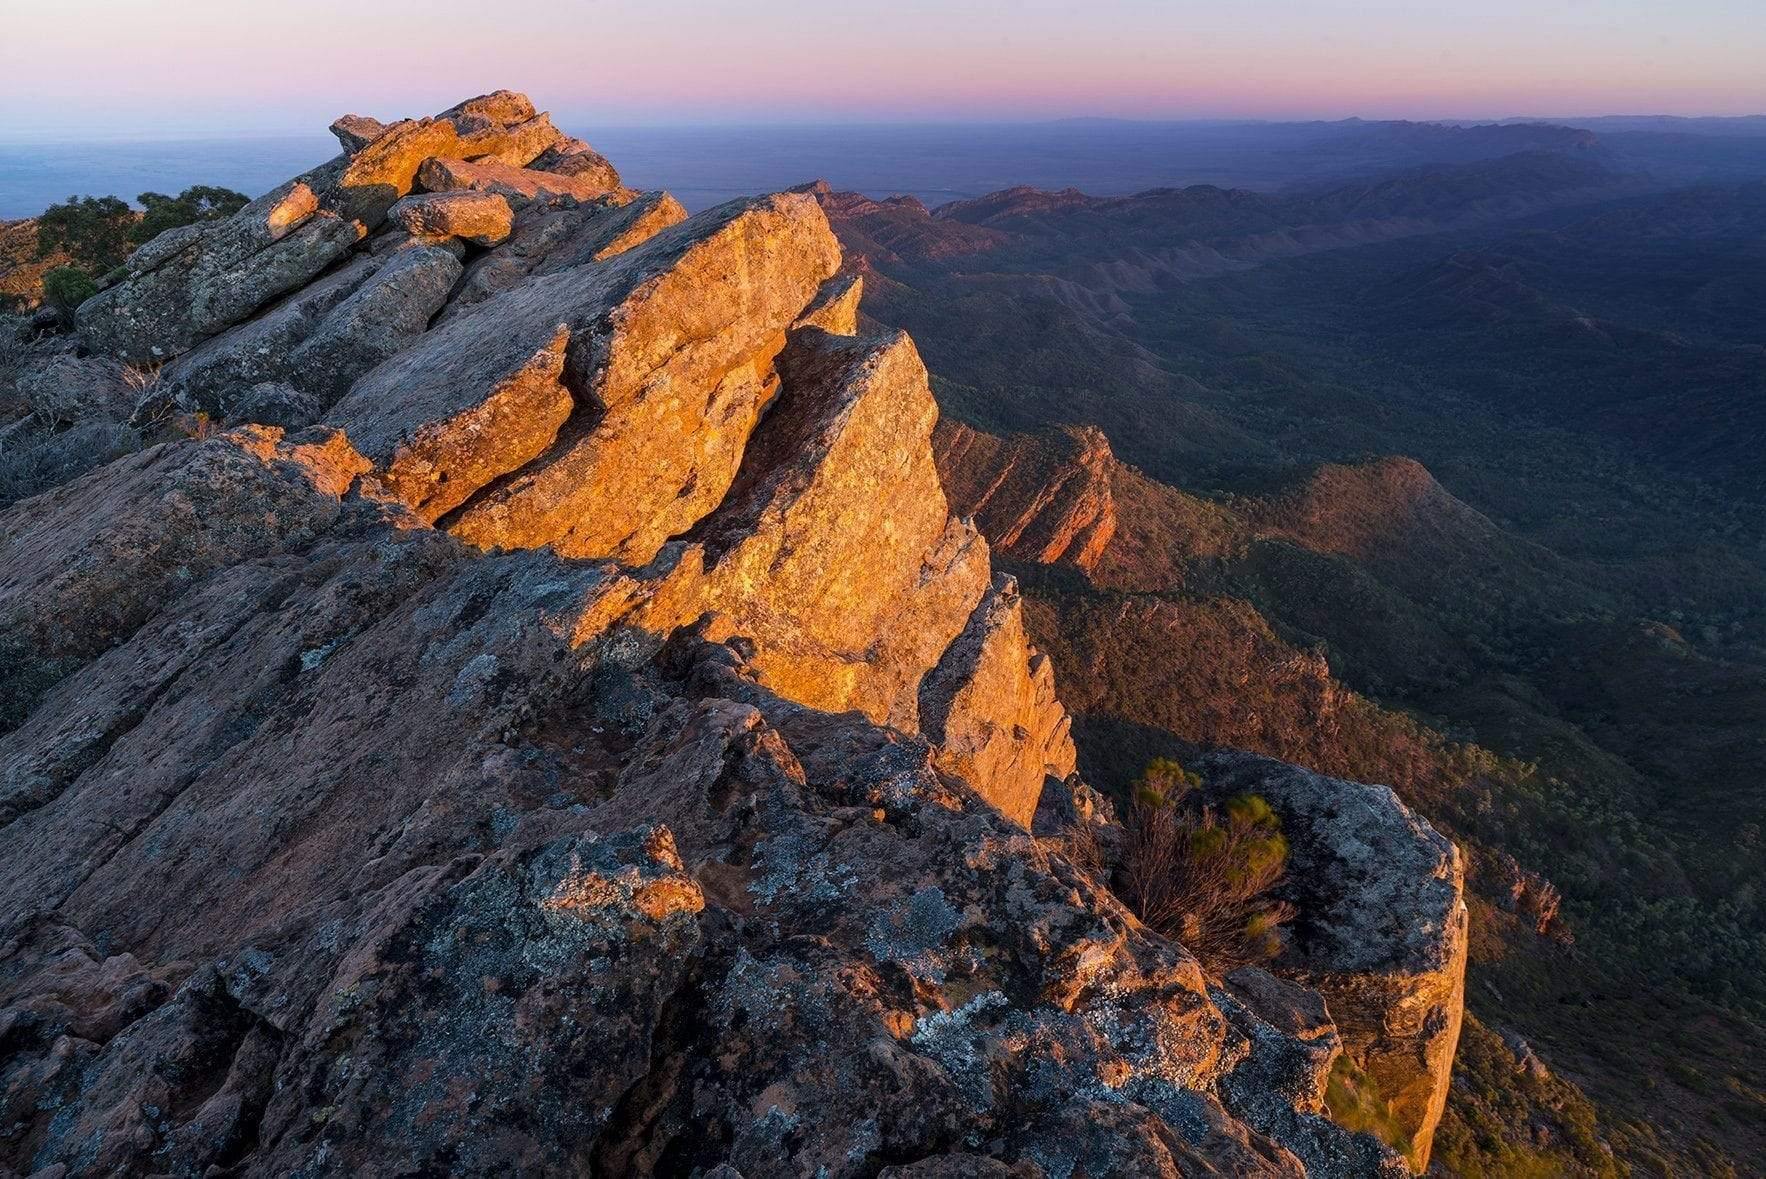 Giant high mountain peaks with partially hitting sunlight, St Mary's Peak - Flinders Ranges SA